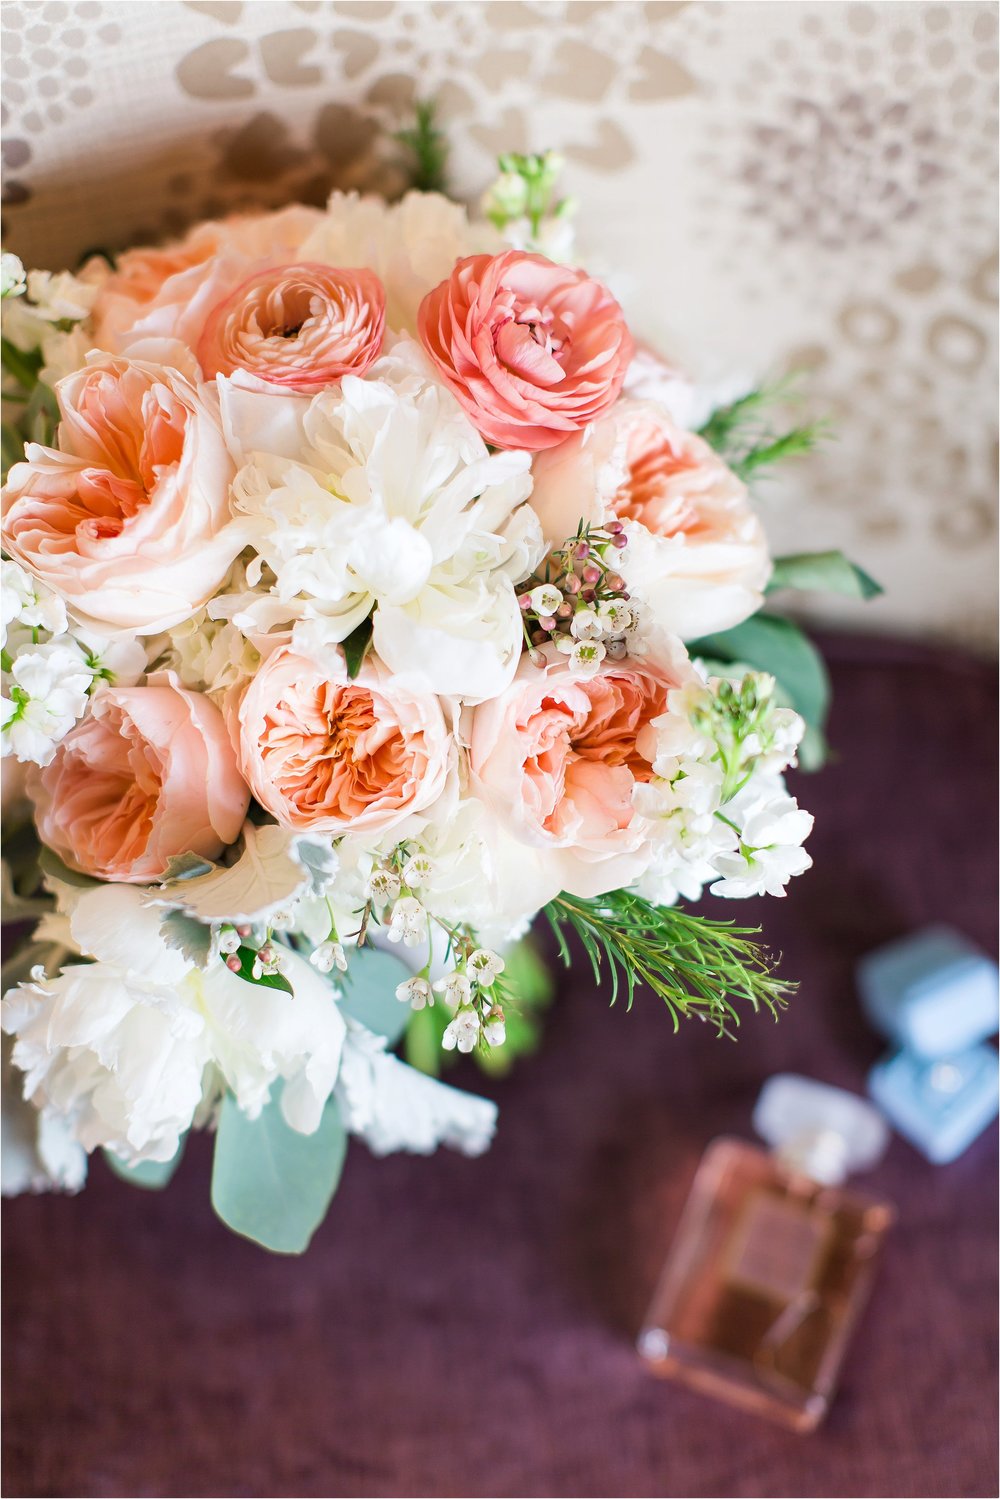 Peach garden rose and white peony bridal bouquet with ranunculus at Wyndham Grand Resort at Bonnet Creek wedding 